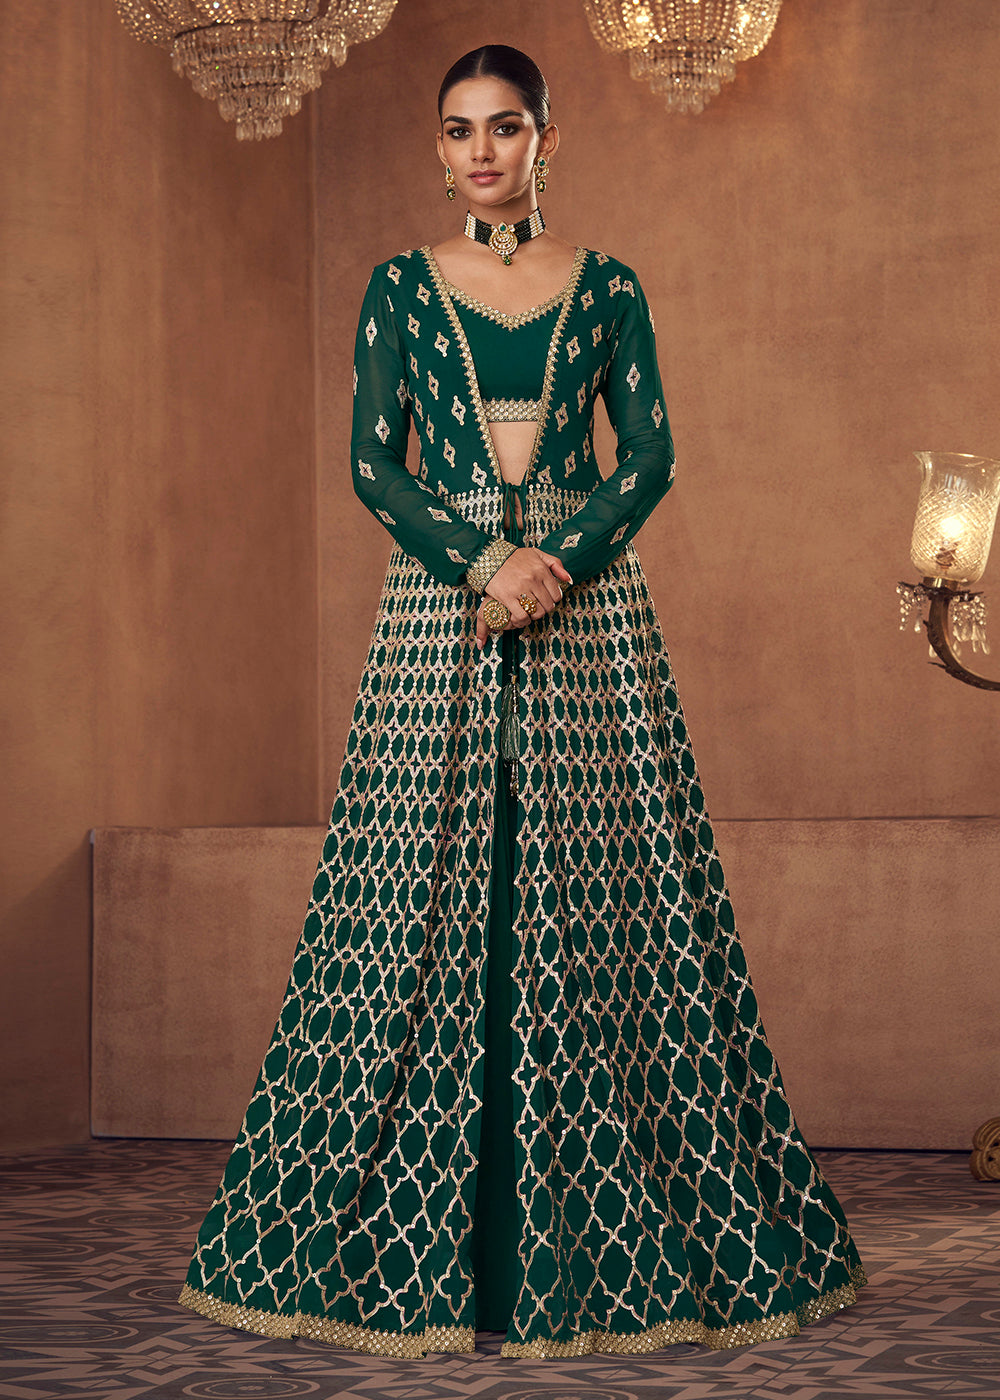 Shop Now Pine Green Crop Top Style Georgette Lehenga Skirt Suit Online in USA, UK, Canada & Worldwide at Empress Clothing.